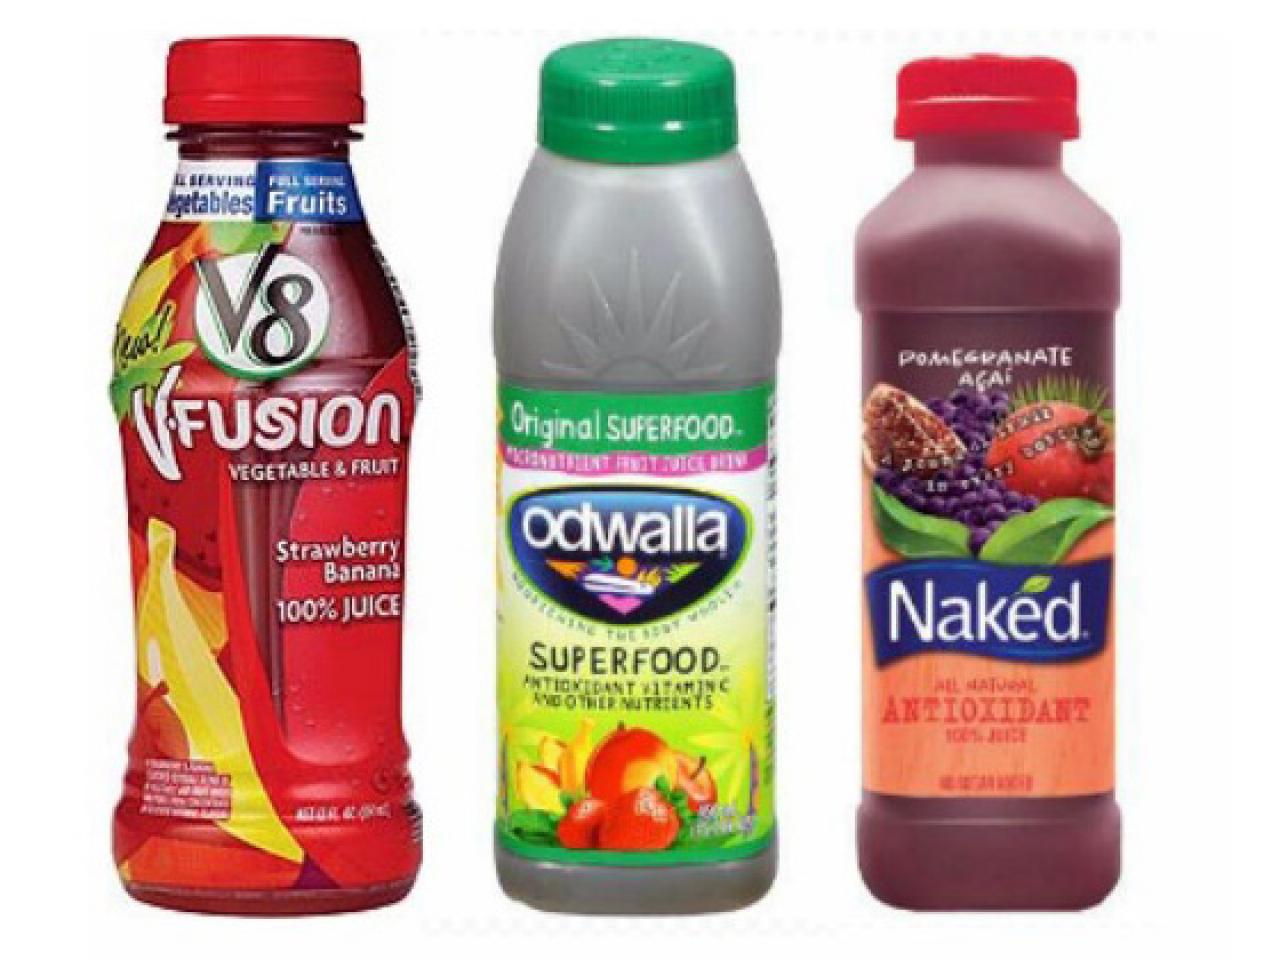 10 Store-Bought Juices With the Best-Quality Ingredients